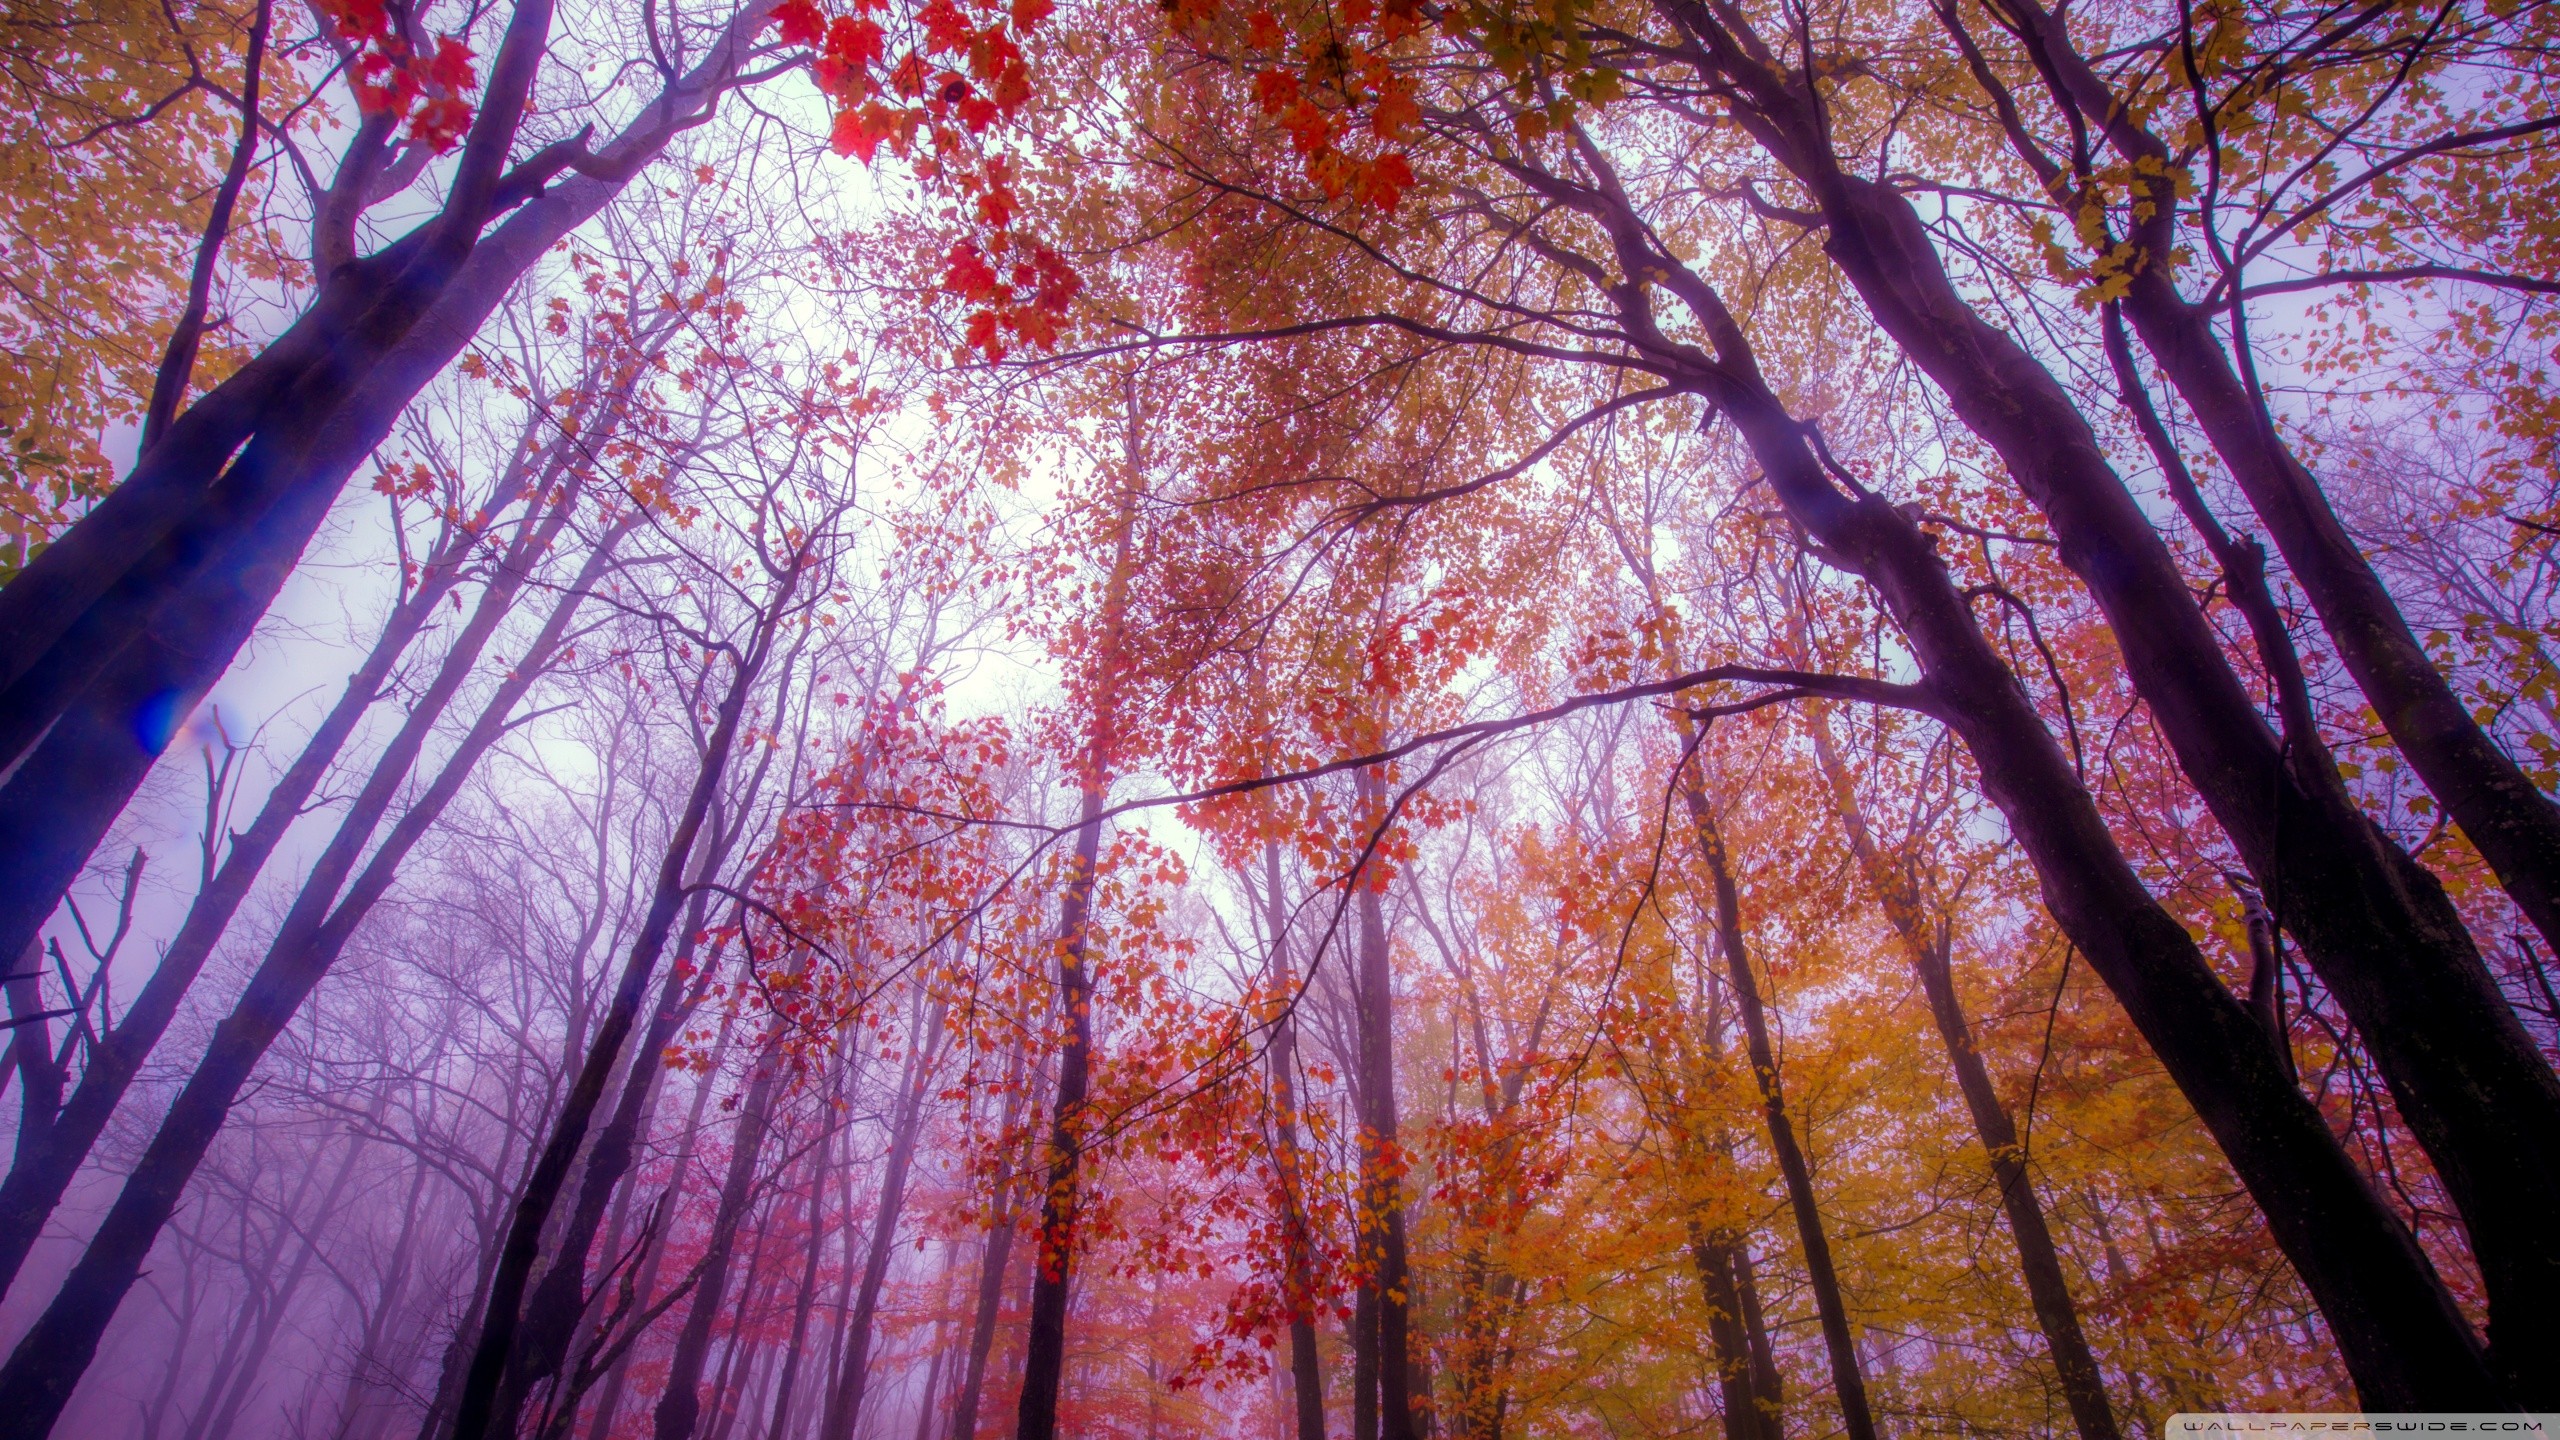 General 2560x1440 forest trees nature worm's eye view low-angle fall mist